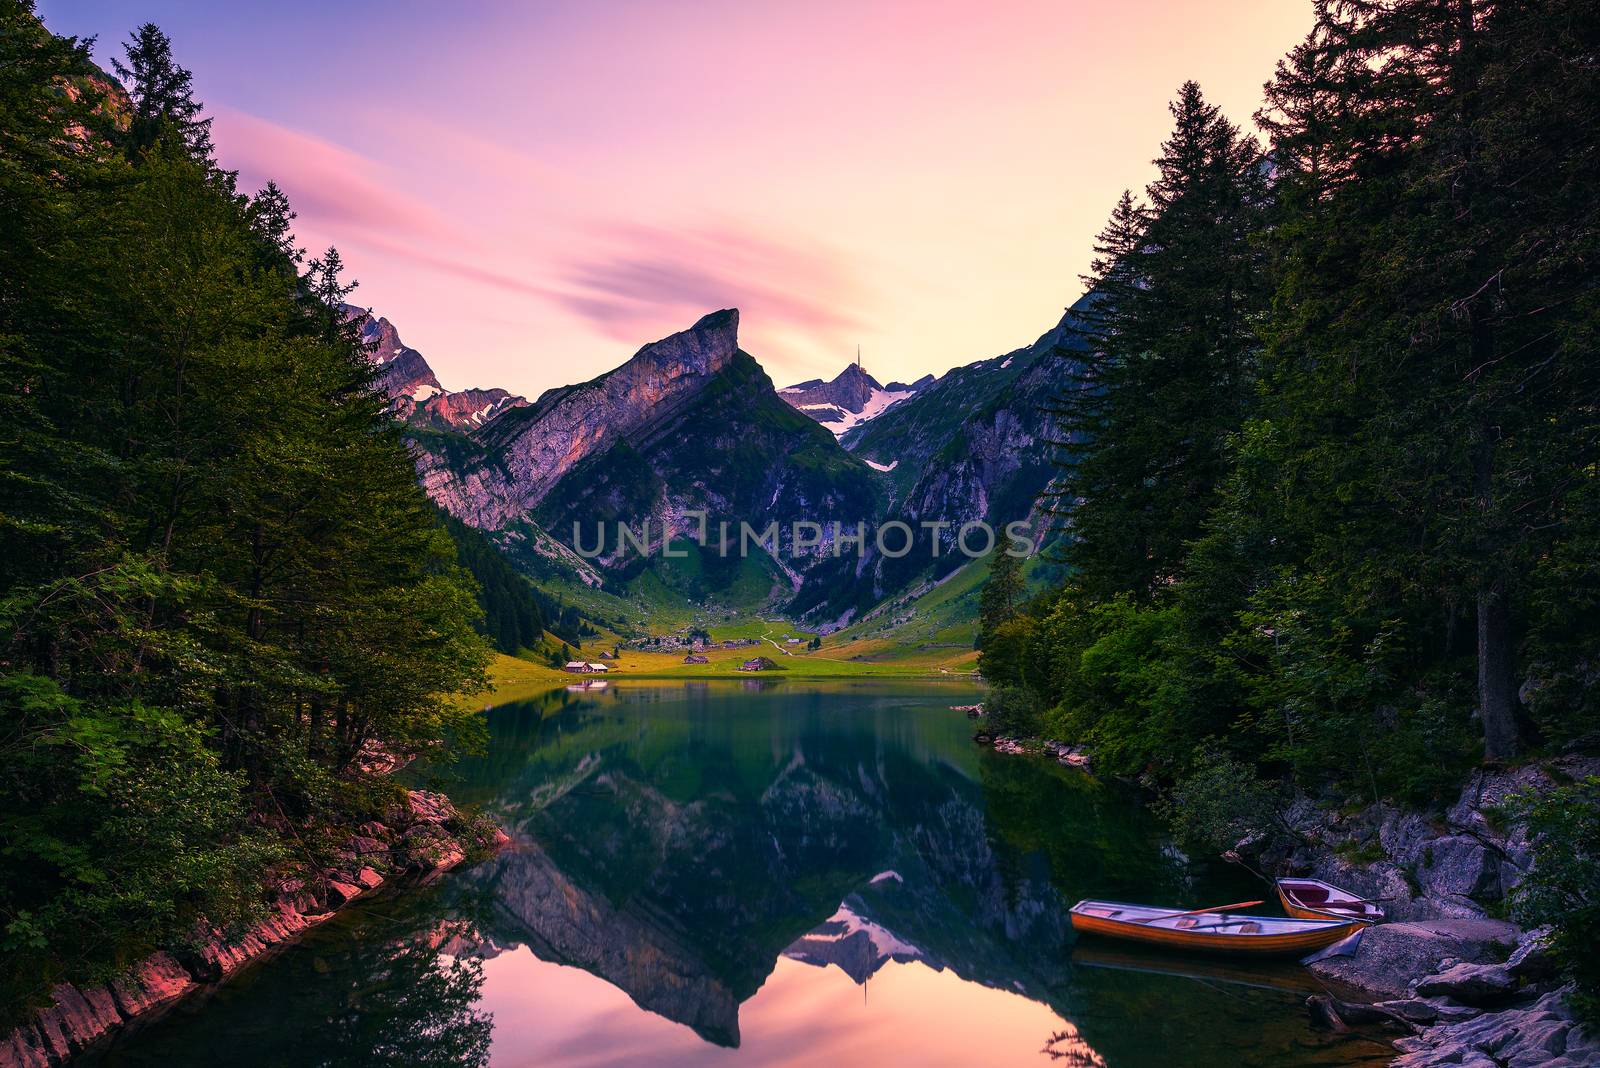 Sunset over the Seealpsee lake with small boats in the Swiss Alps, Switzerland by nickfox